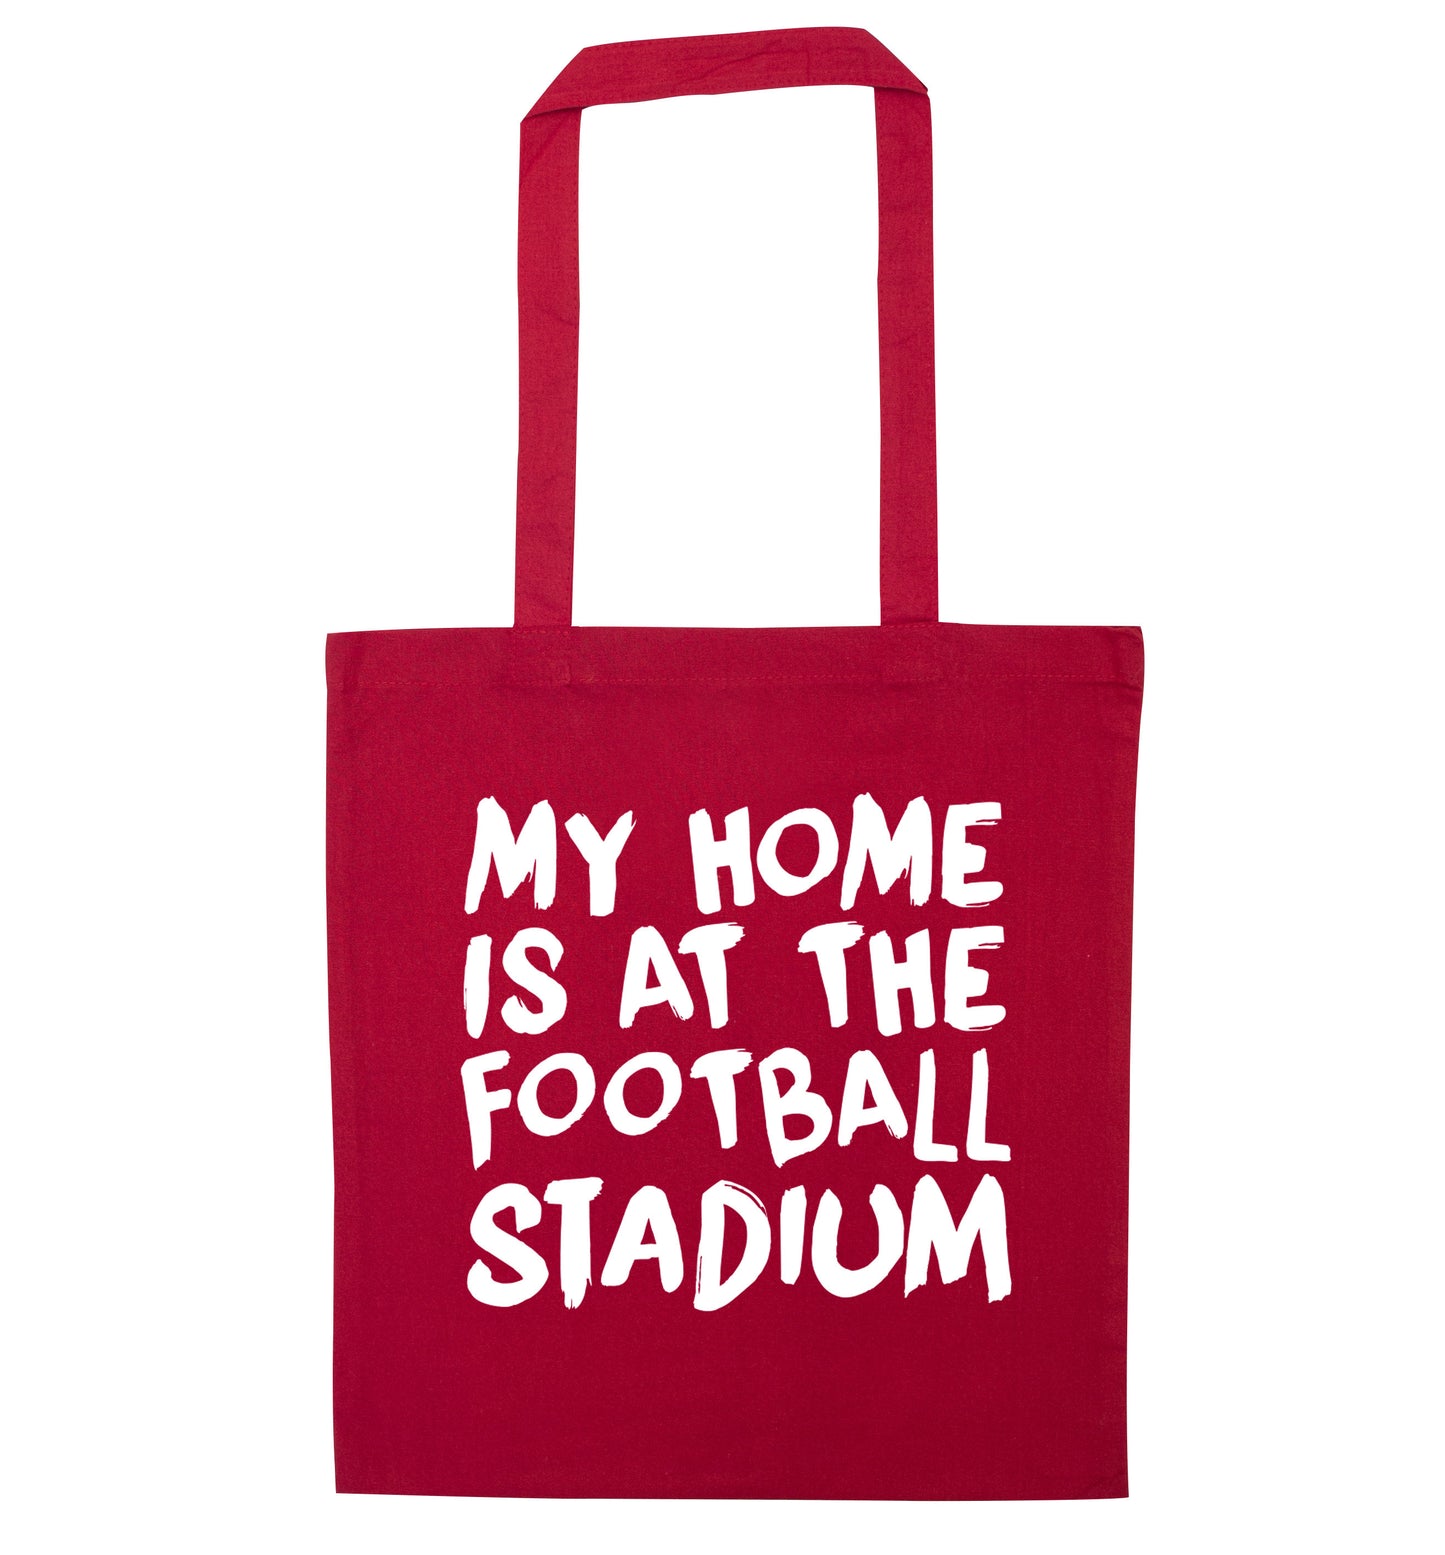 My home is at the football stadium red tote bag